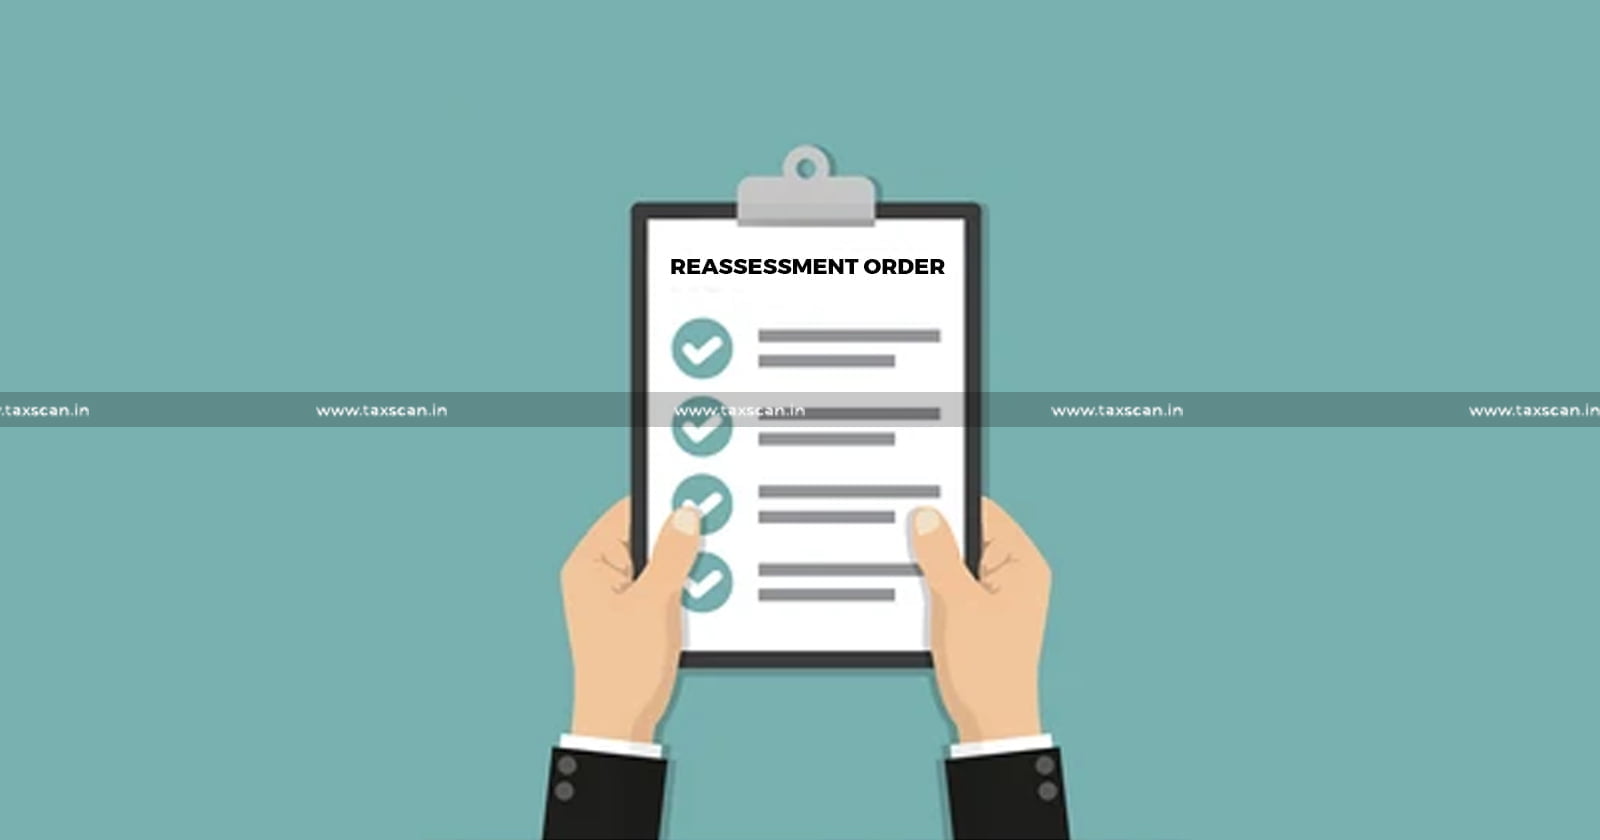 Approval of Reassessment Order - Reassessment Order - JCIT - ITAT invalidates Income Tax Notice - ITAT - Income Tax Notice - Income Tax - Notice - Reassessment Proceedings - Taxscan